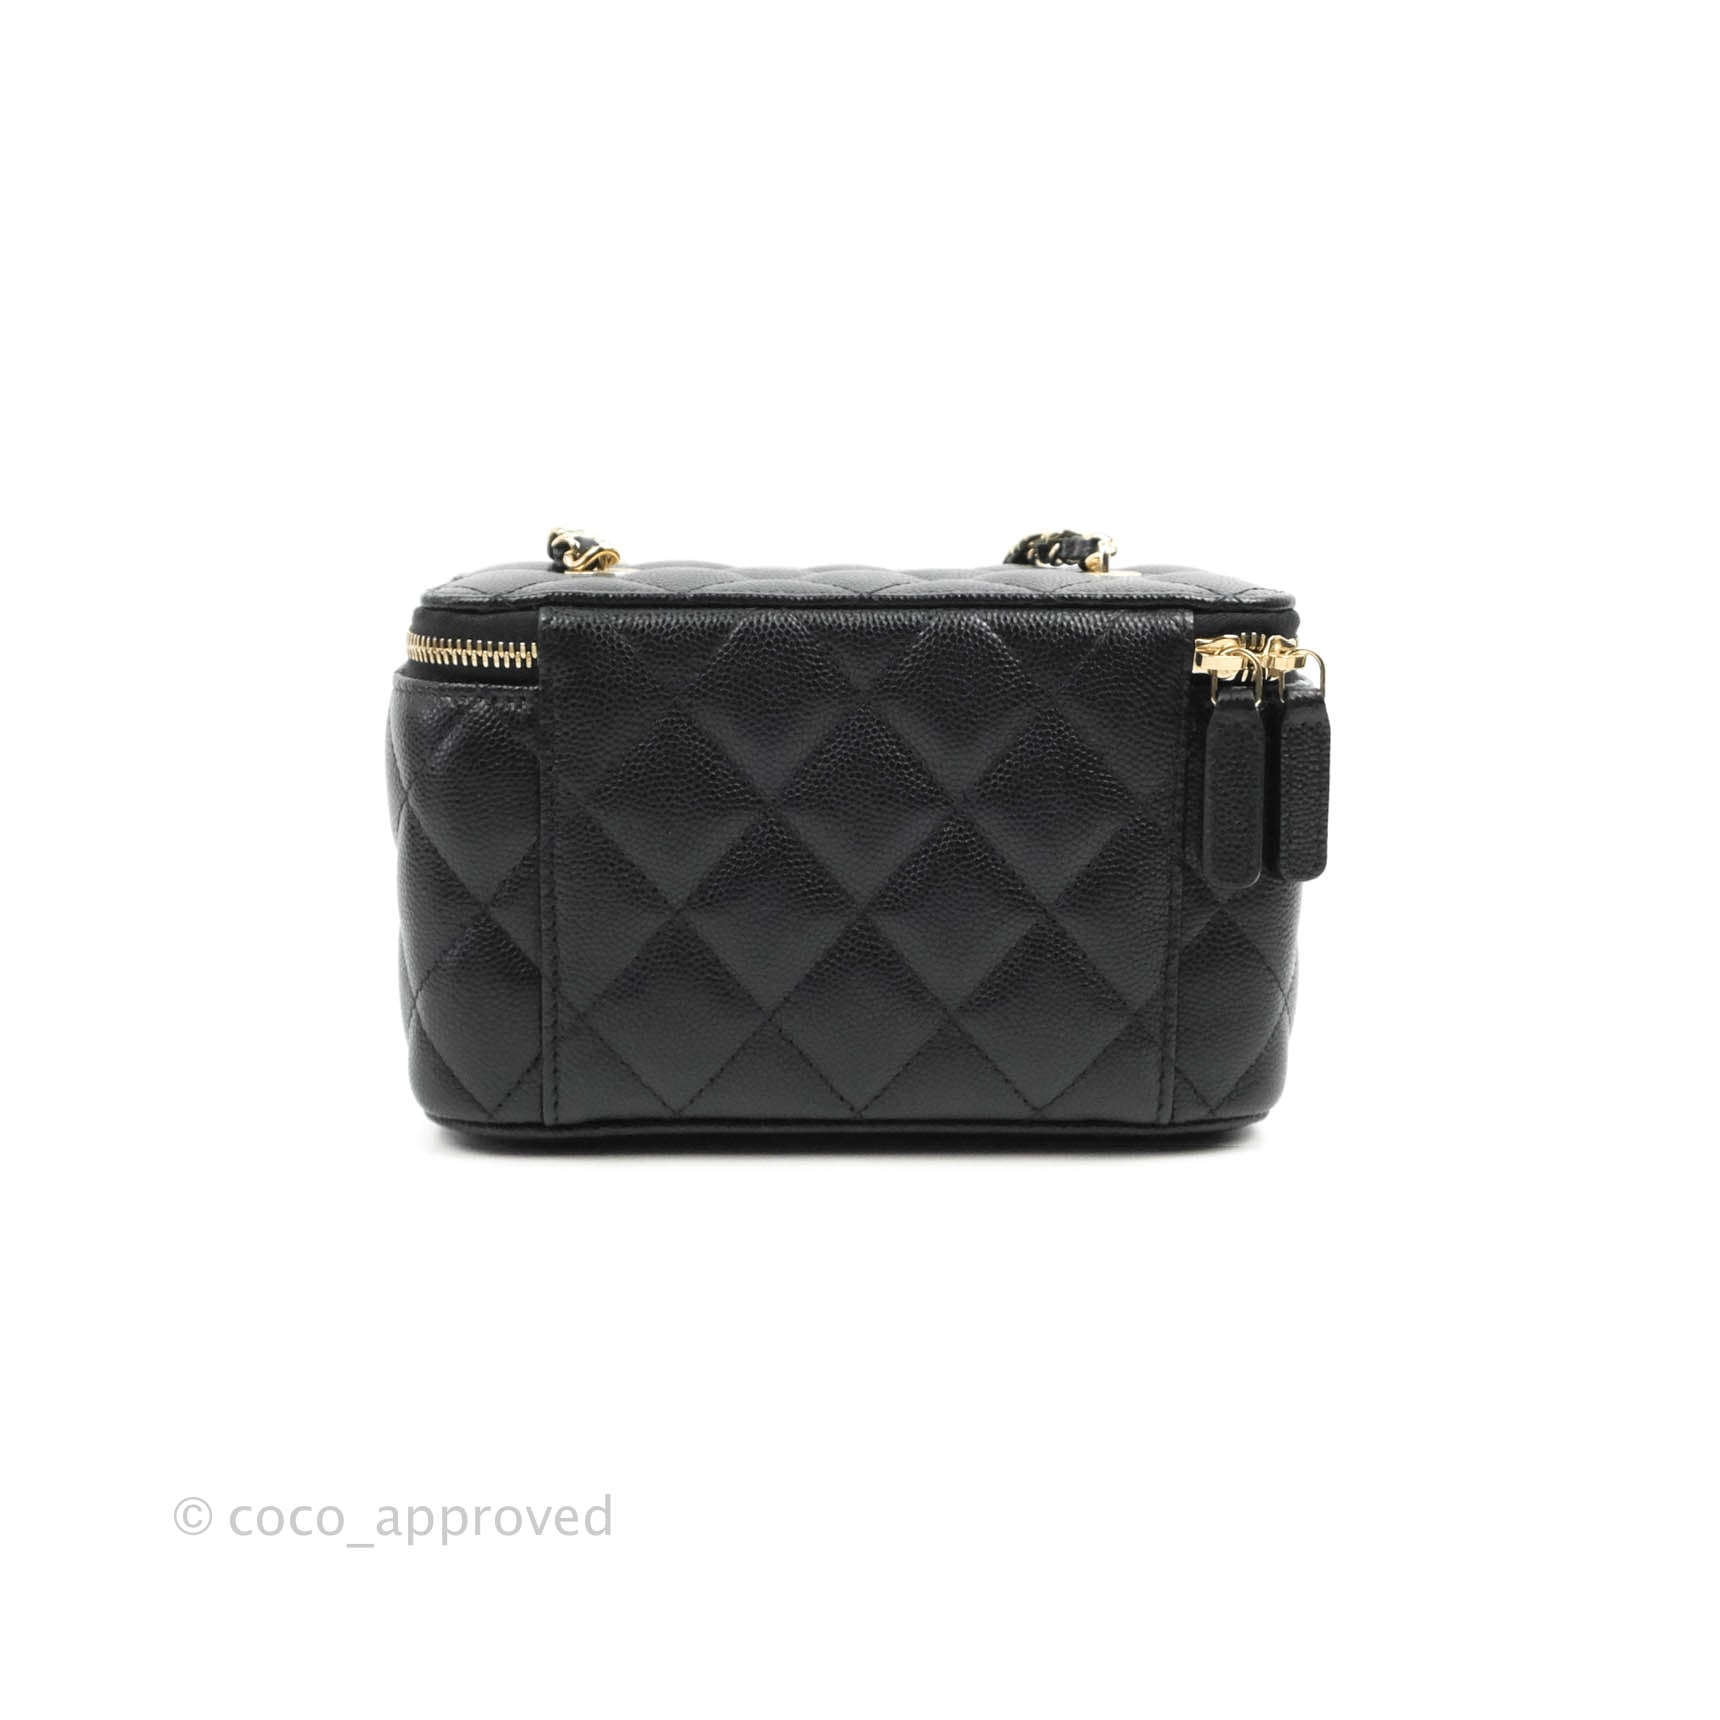 Complete Review of the Chanel Vanity Bag